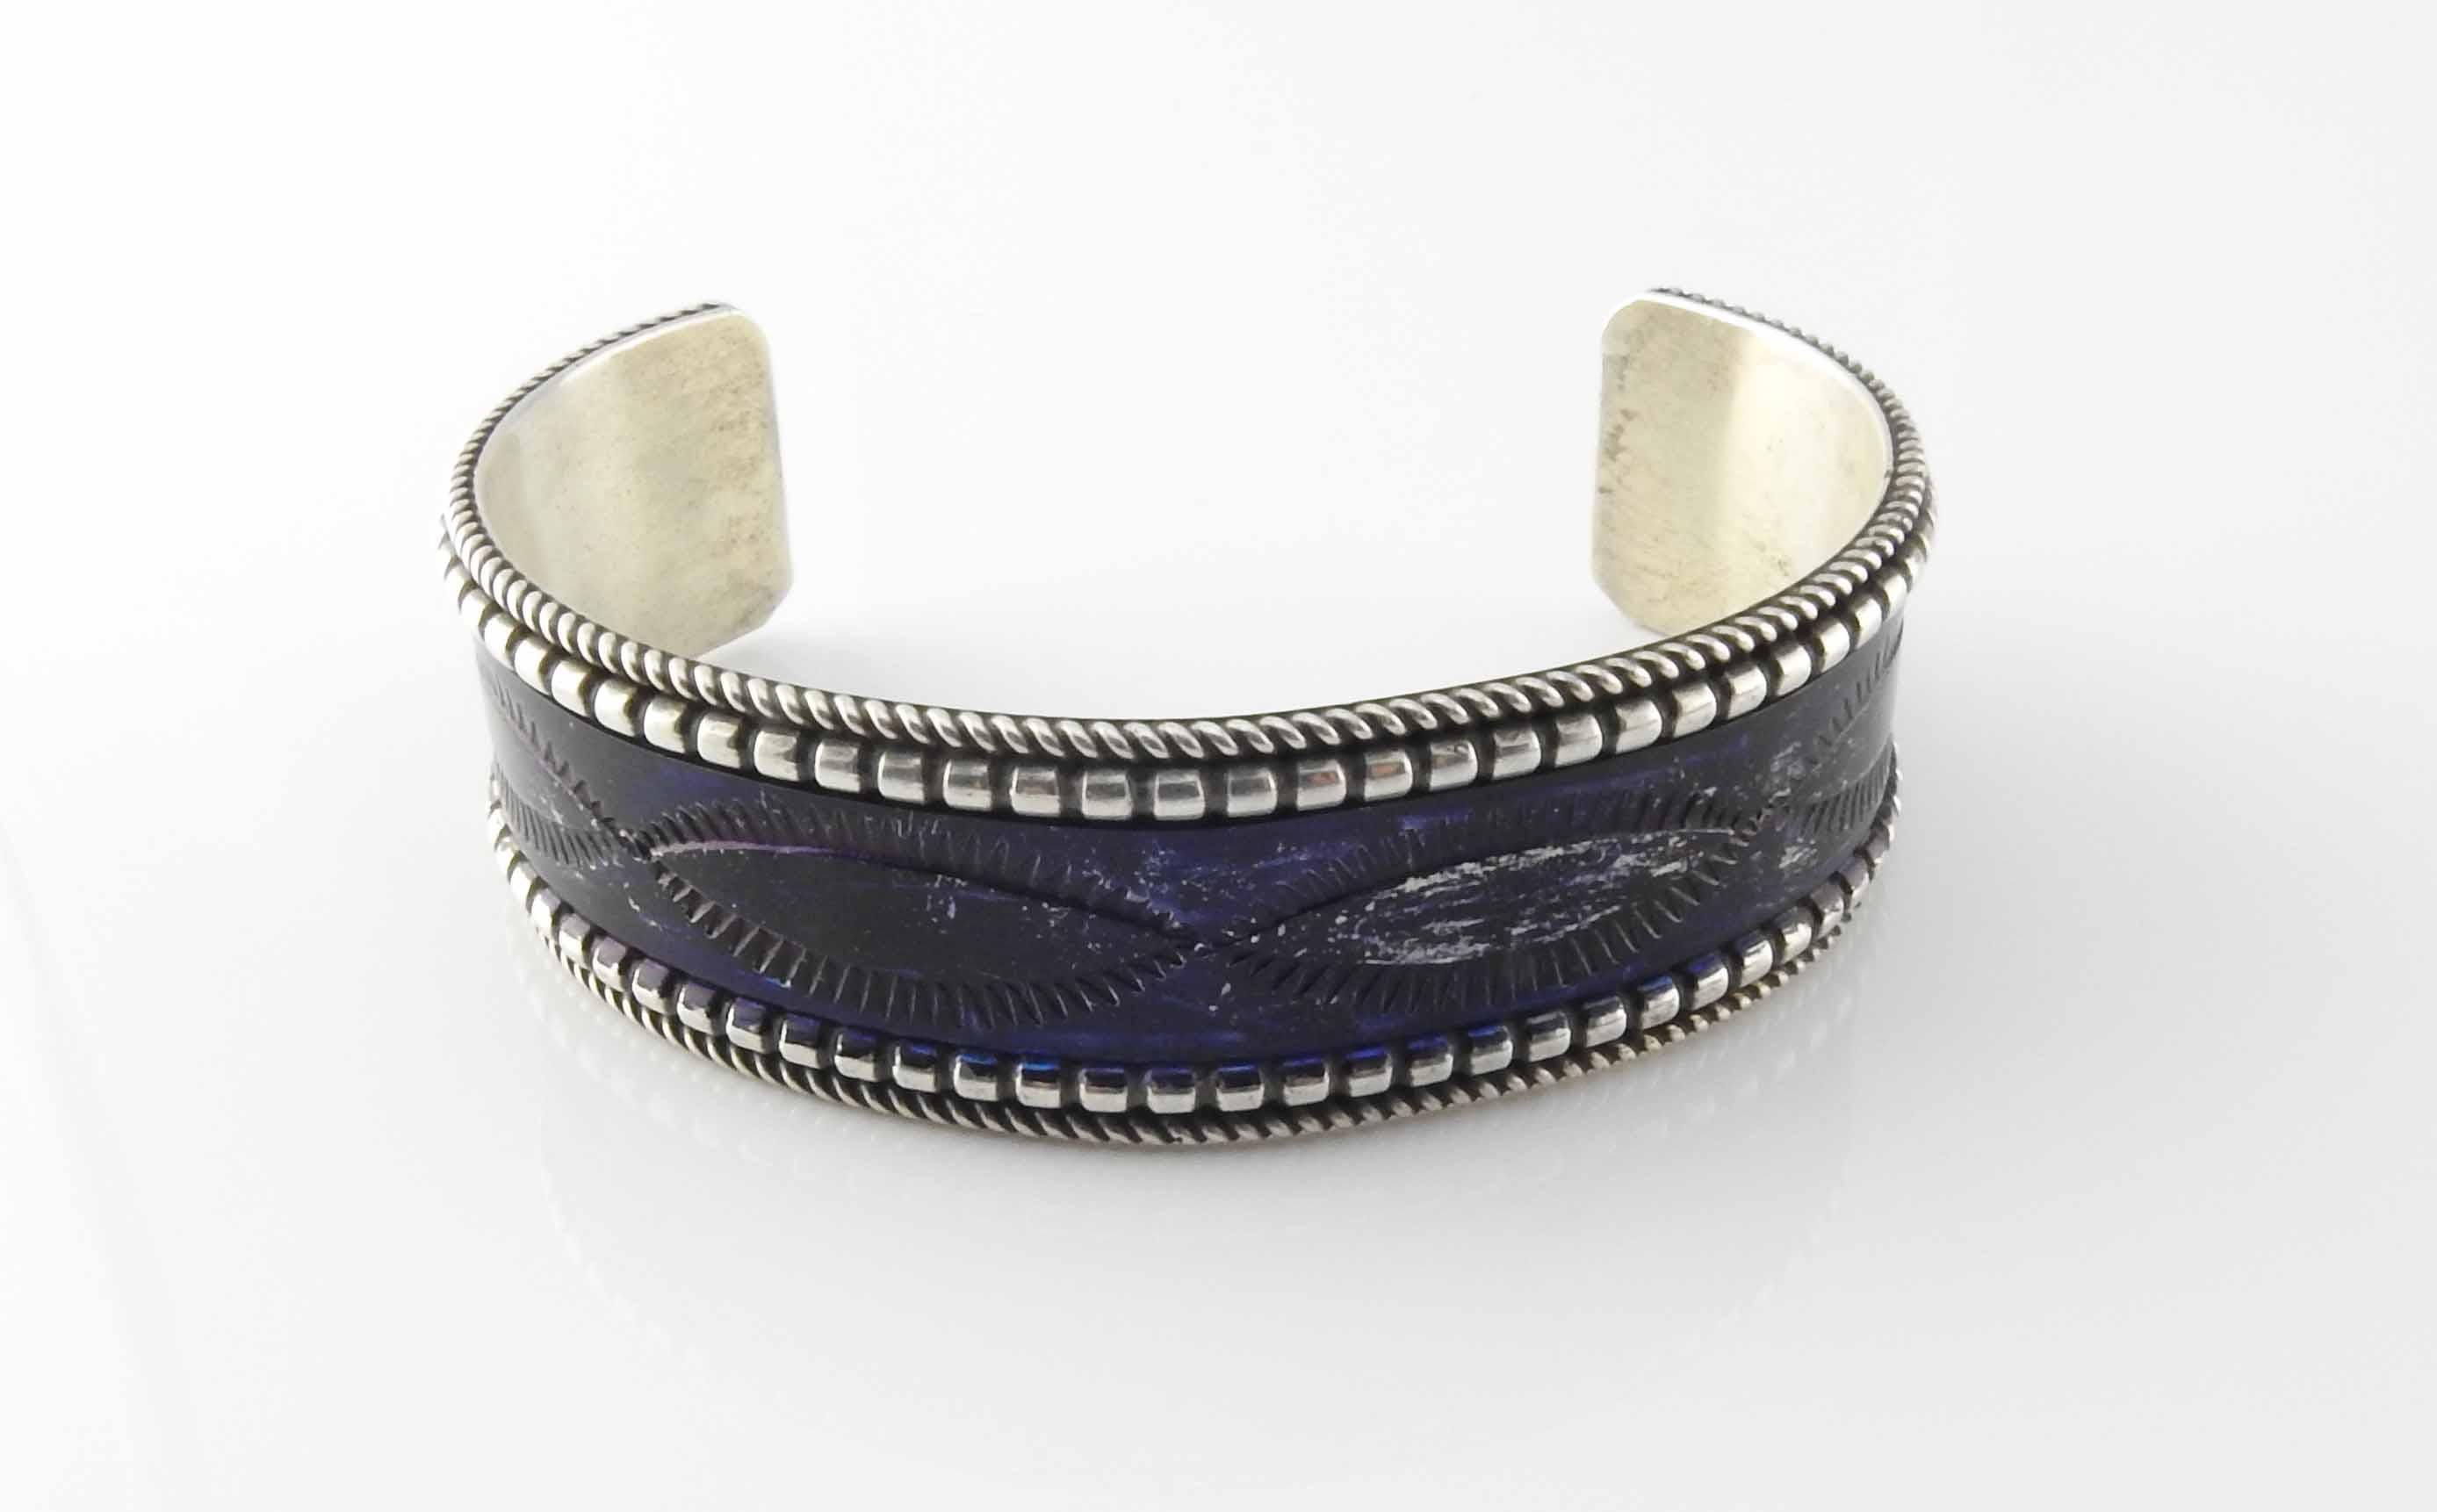 Navajo sterling silver cuff bracelet by Celina Yazzie. Dark purple enamel with embossed design and beaded and roped edges.

Measures 3/4